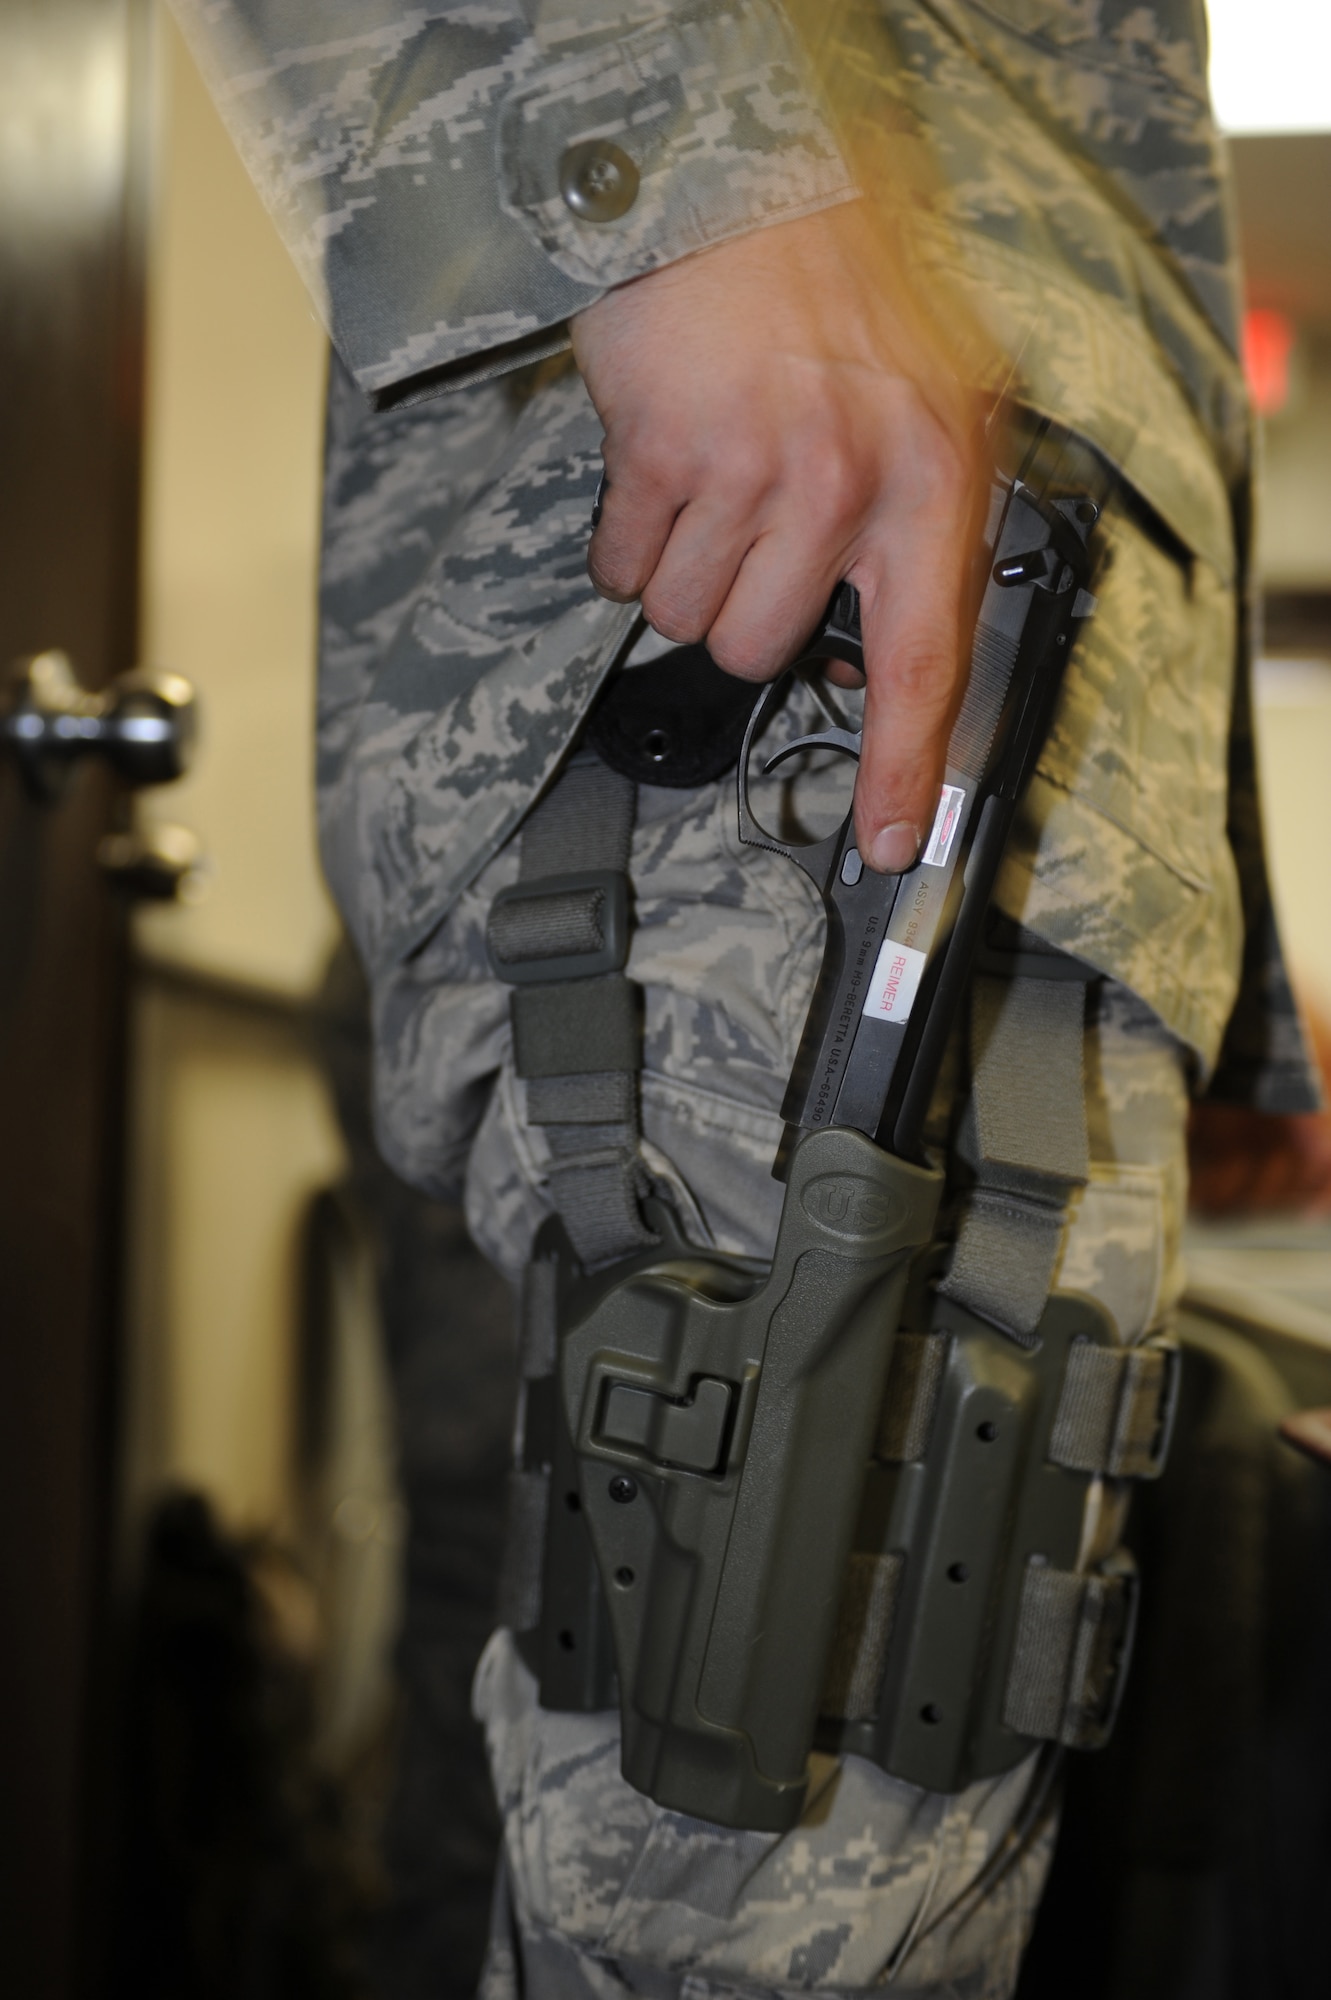 WHITEMAN AIR FORCE BASE, Mo. - An Airman draws his M-9 pistol, practicing unlocking the holster during combat arms training the Combat Arms Training and Maintenance facility here, March 16, 2010. (U.S. Air Force photo by Airman 1st Class Carlin Leslie)(Released)



